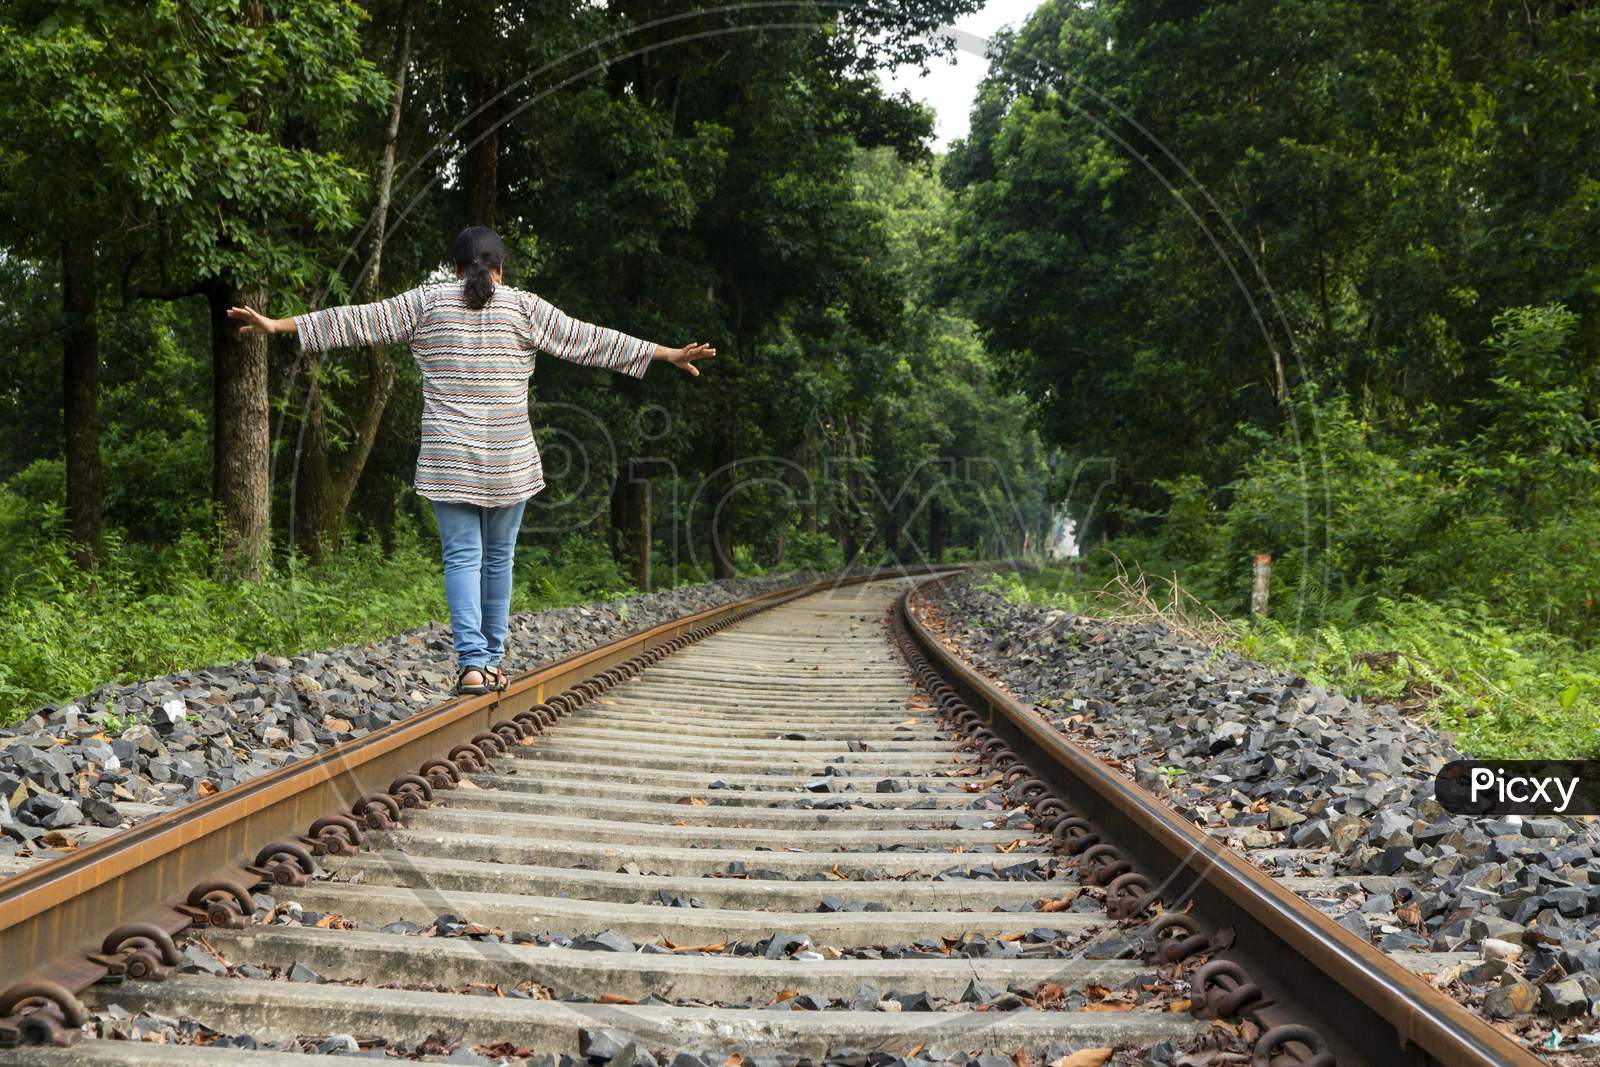 A Young Lady Enjoying Balance On A Train Track In A Forest at Dooars in West Bengal in India